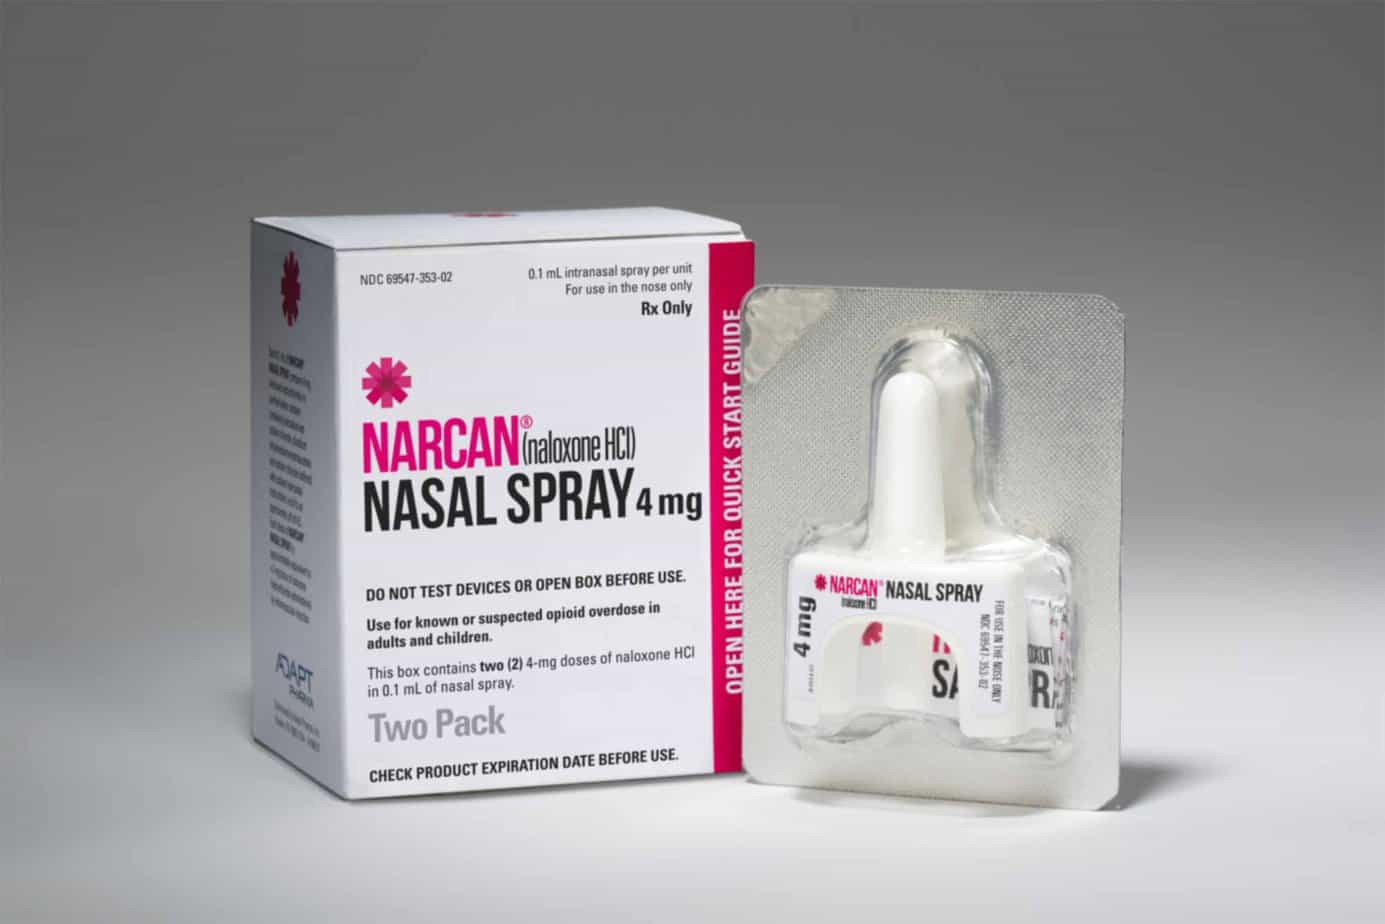 How to Use Narcan